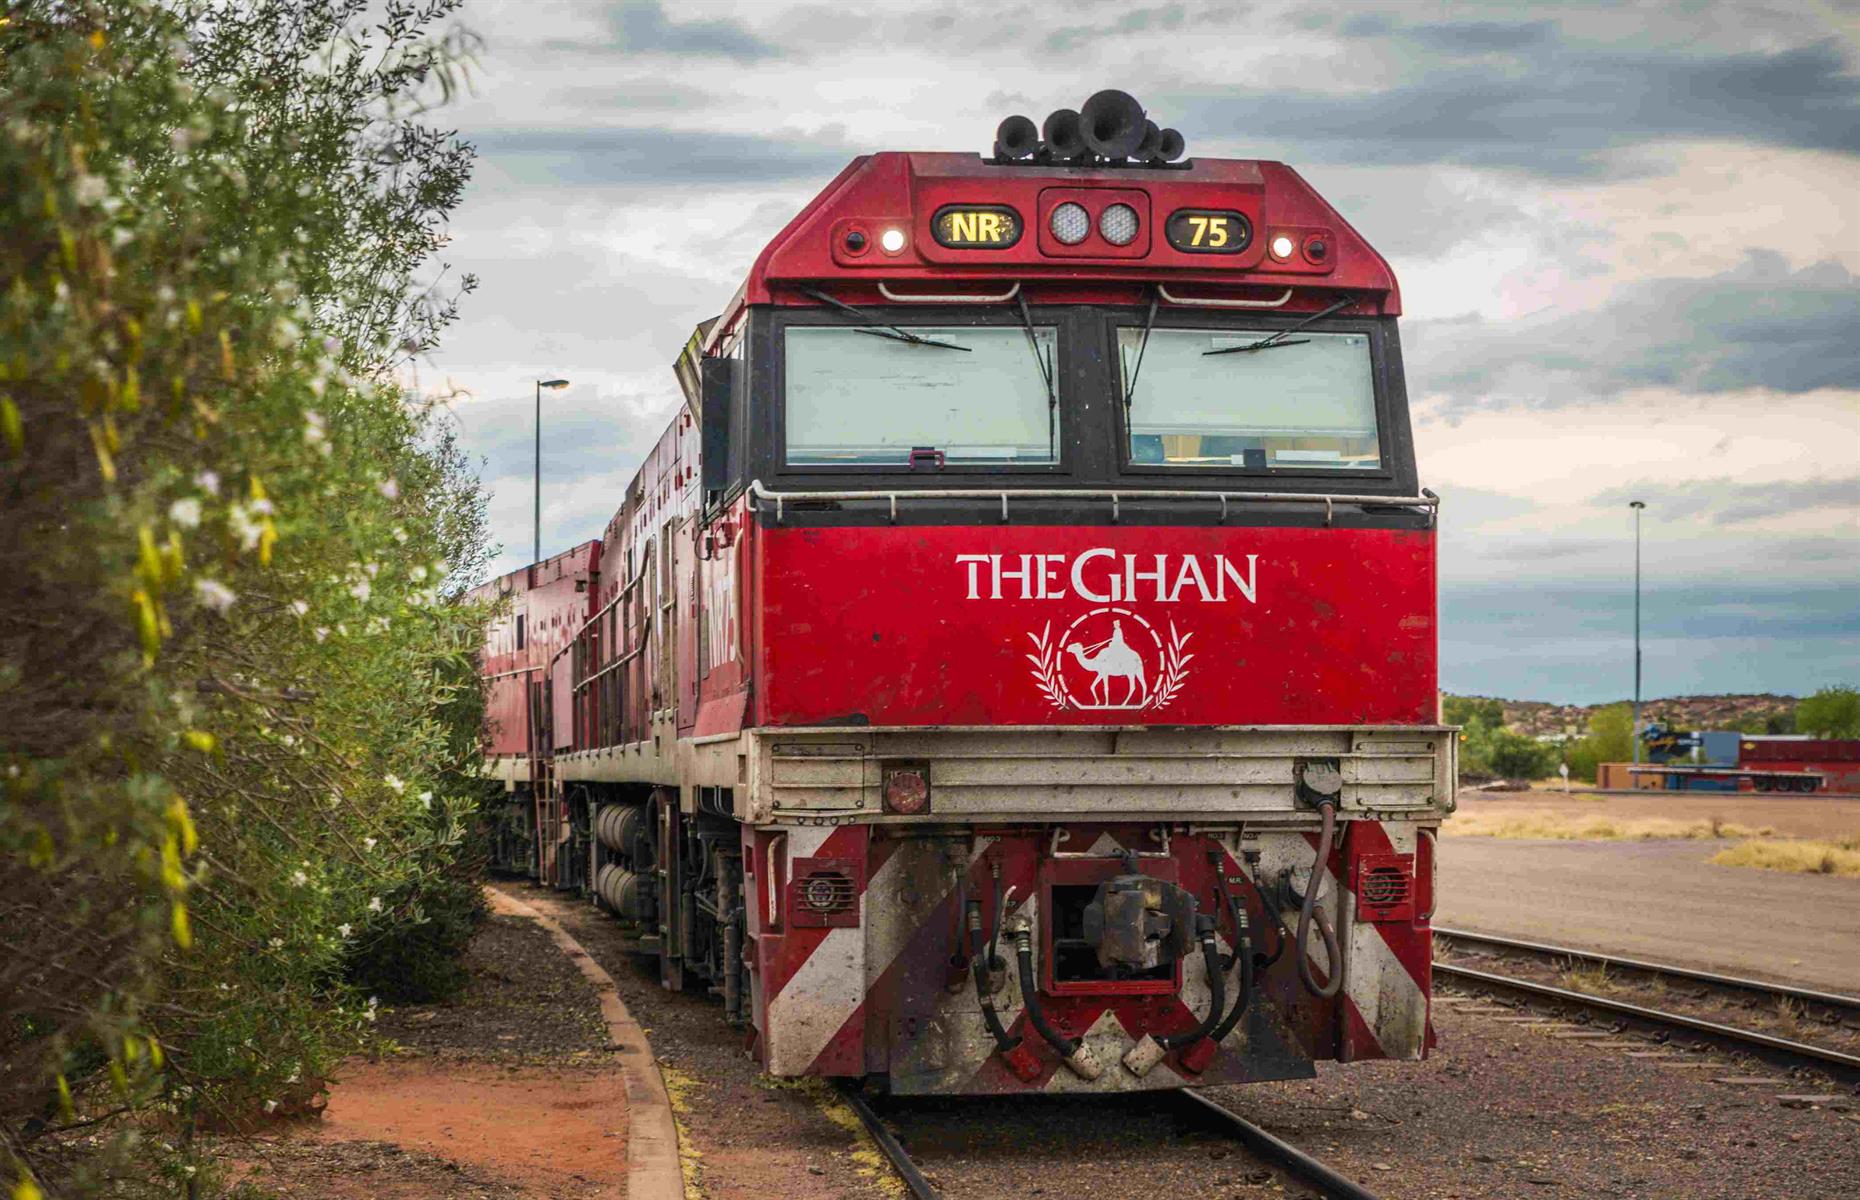 Linking the northern and southern reaches of this vast nation, the Ghan crosses from Darwin in the Northern Territory to Adelaide in South Australia over four days, slicing through the red and wild interior of this vast island.